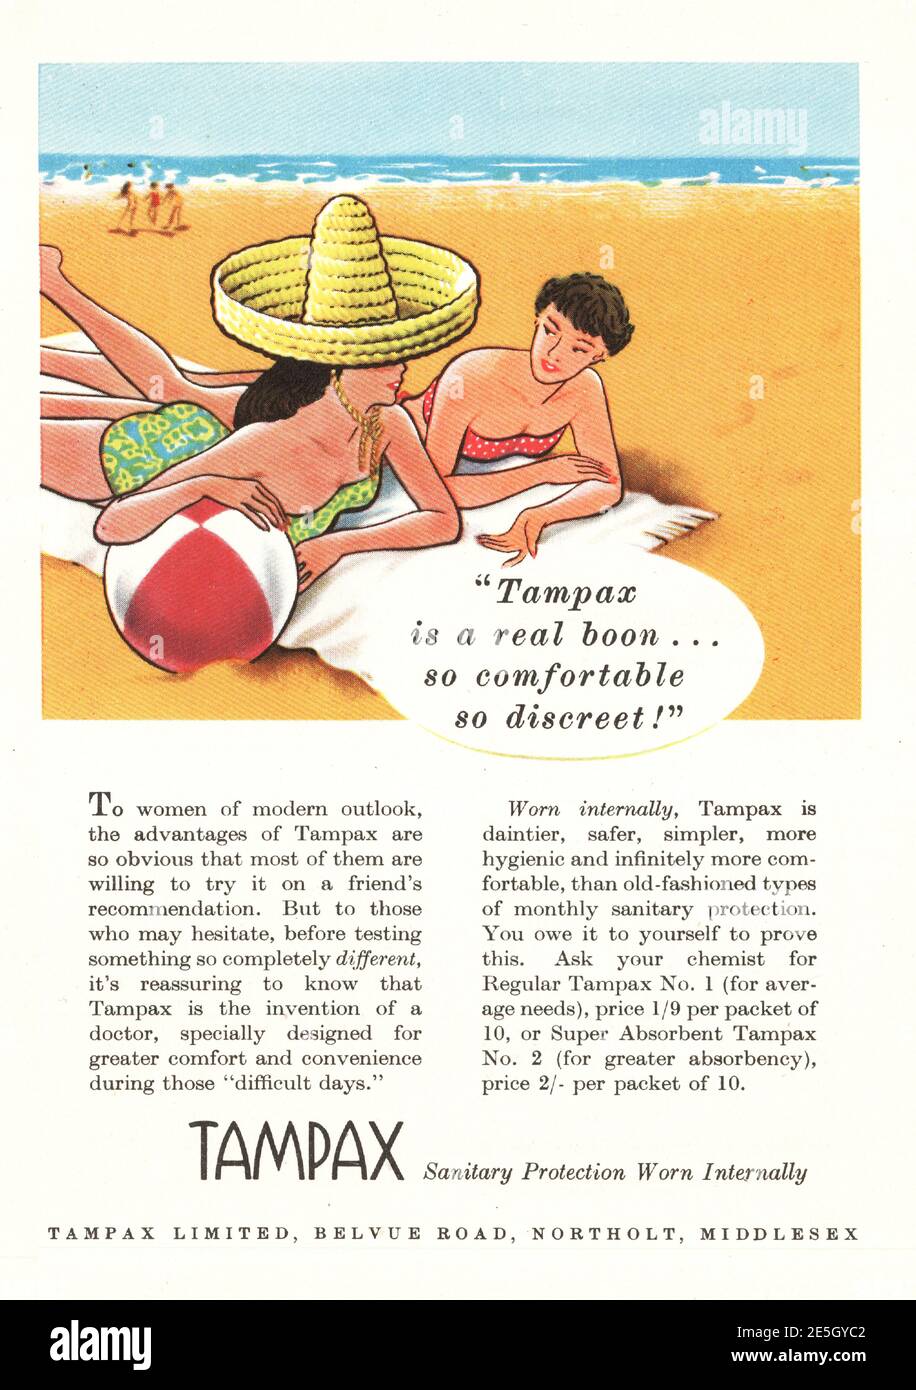 1968 Tampax Tampons woman swimming White swimsuit vintage ad